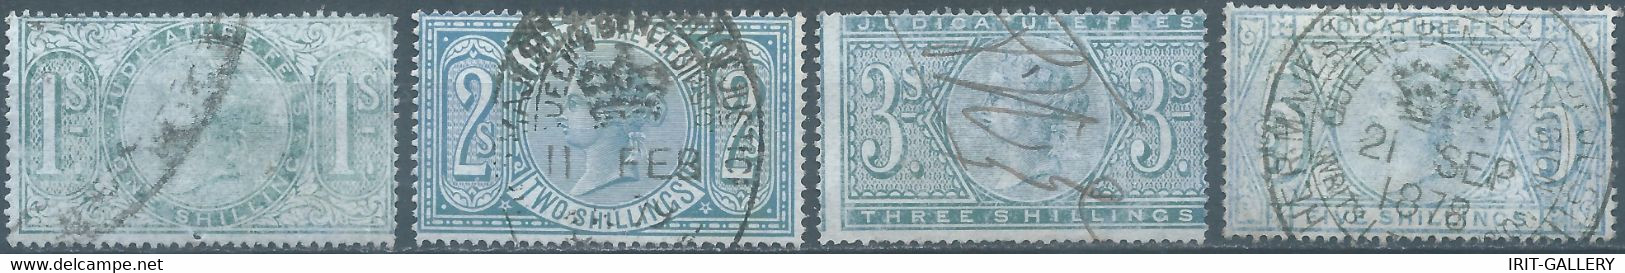 Great Britain-ENGLAND,Queen Victoria,1880-1900 Revenue Stamp Tax Fiscal,JUDICATURE FEES,1-2-3-5 Shillings,Used - Fiscaux